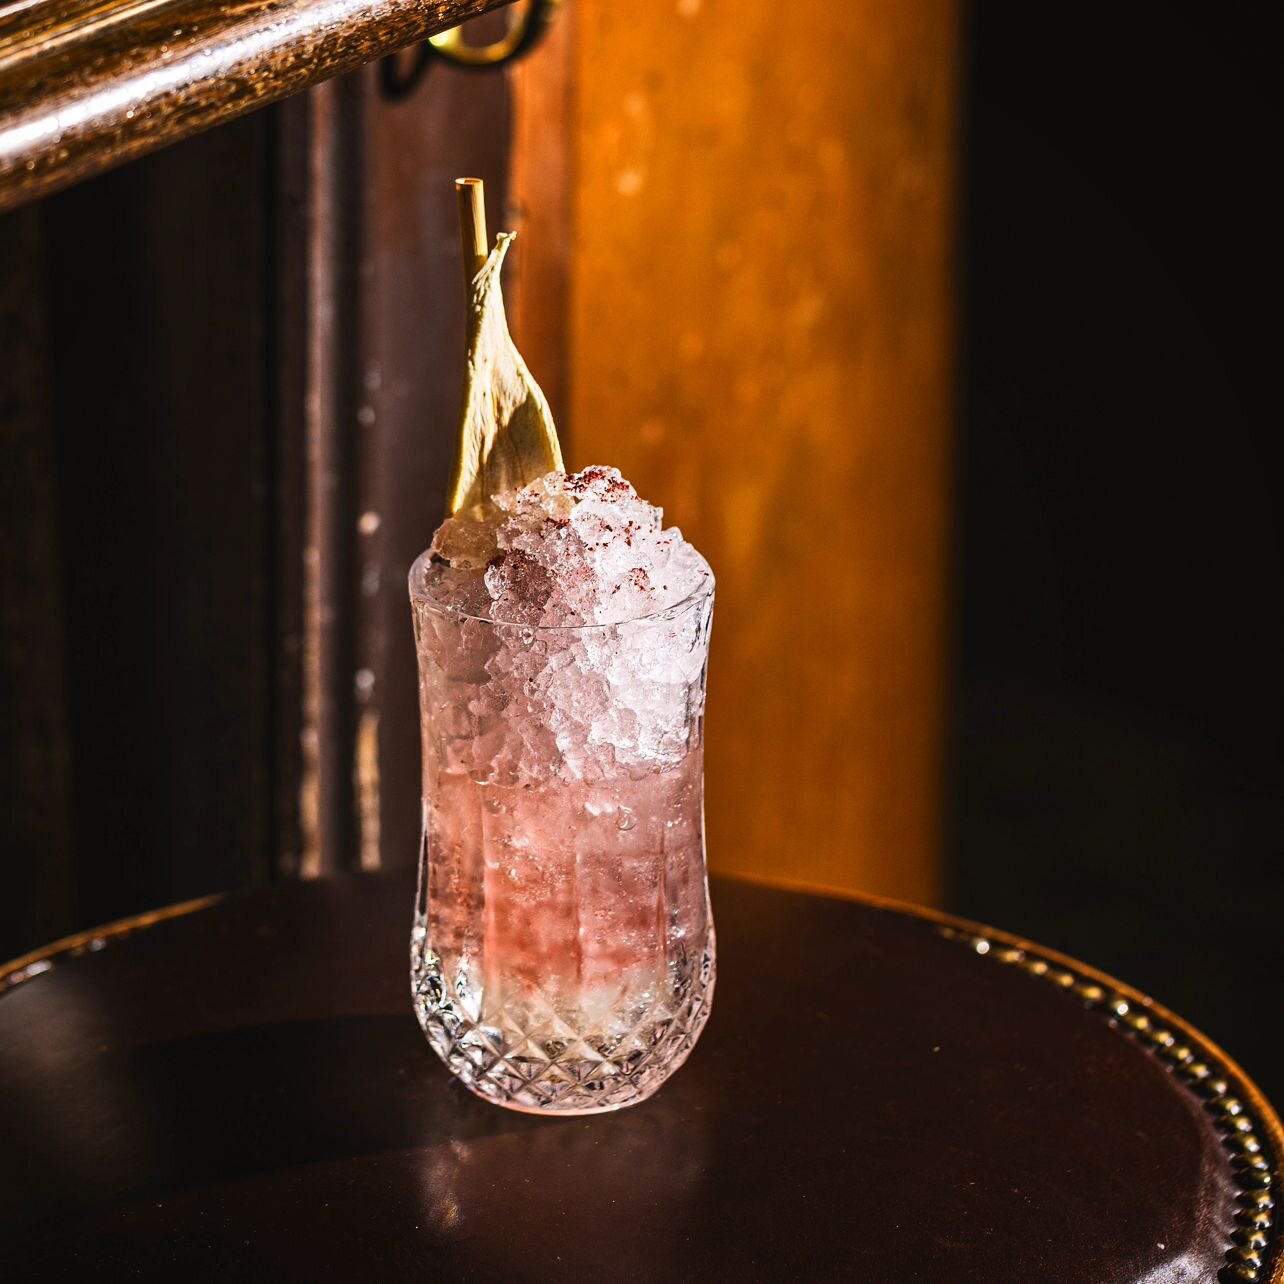 El Sueno Rosa 🌹

Tall, refreshing, and slightly vegetal 

Bombay London dry gin
Sumac vermouth
Parsnip syrup
Dash of magic citrus

Doors open from 5pm-2am

#thelobo #sydneybars #FUEEEGGOO